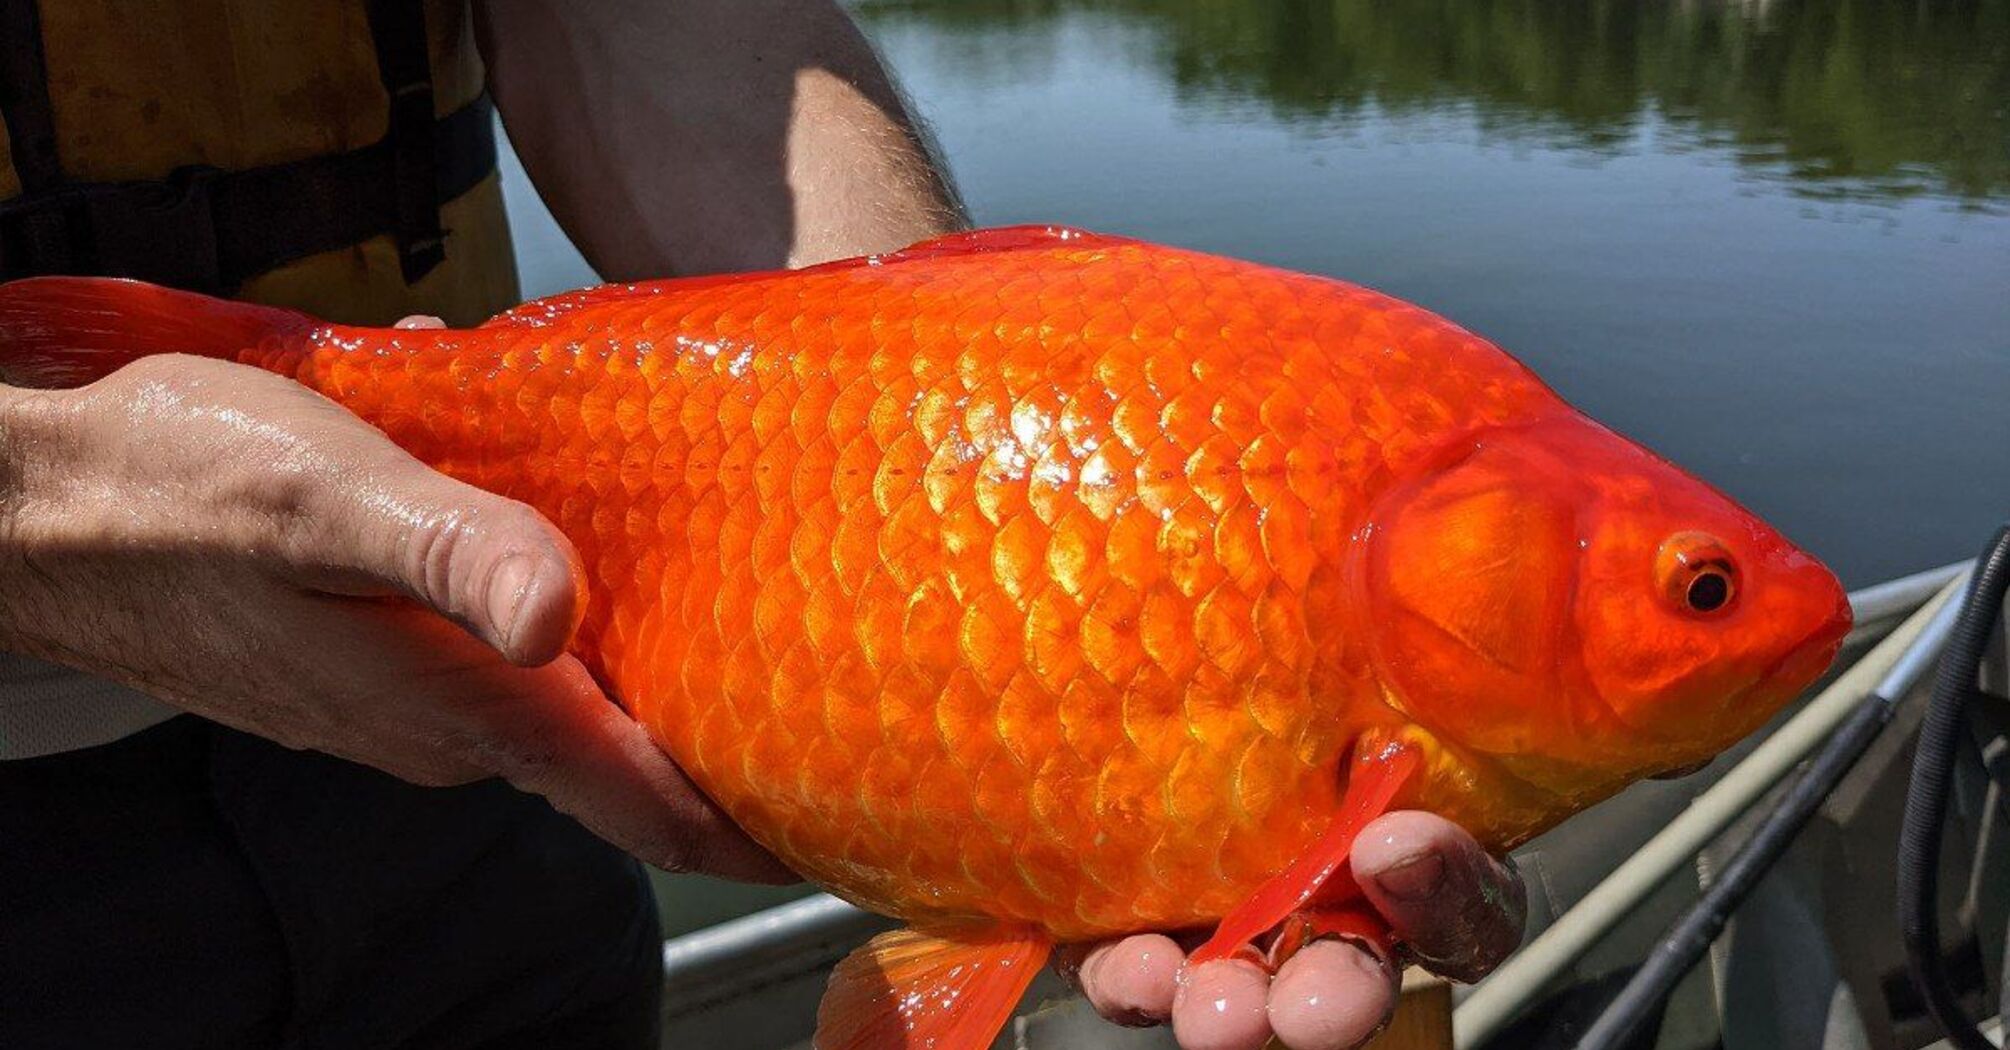 Ornamental aquarium fish have become a threat to large Canadian lakes